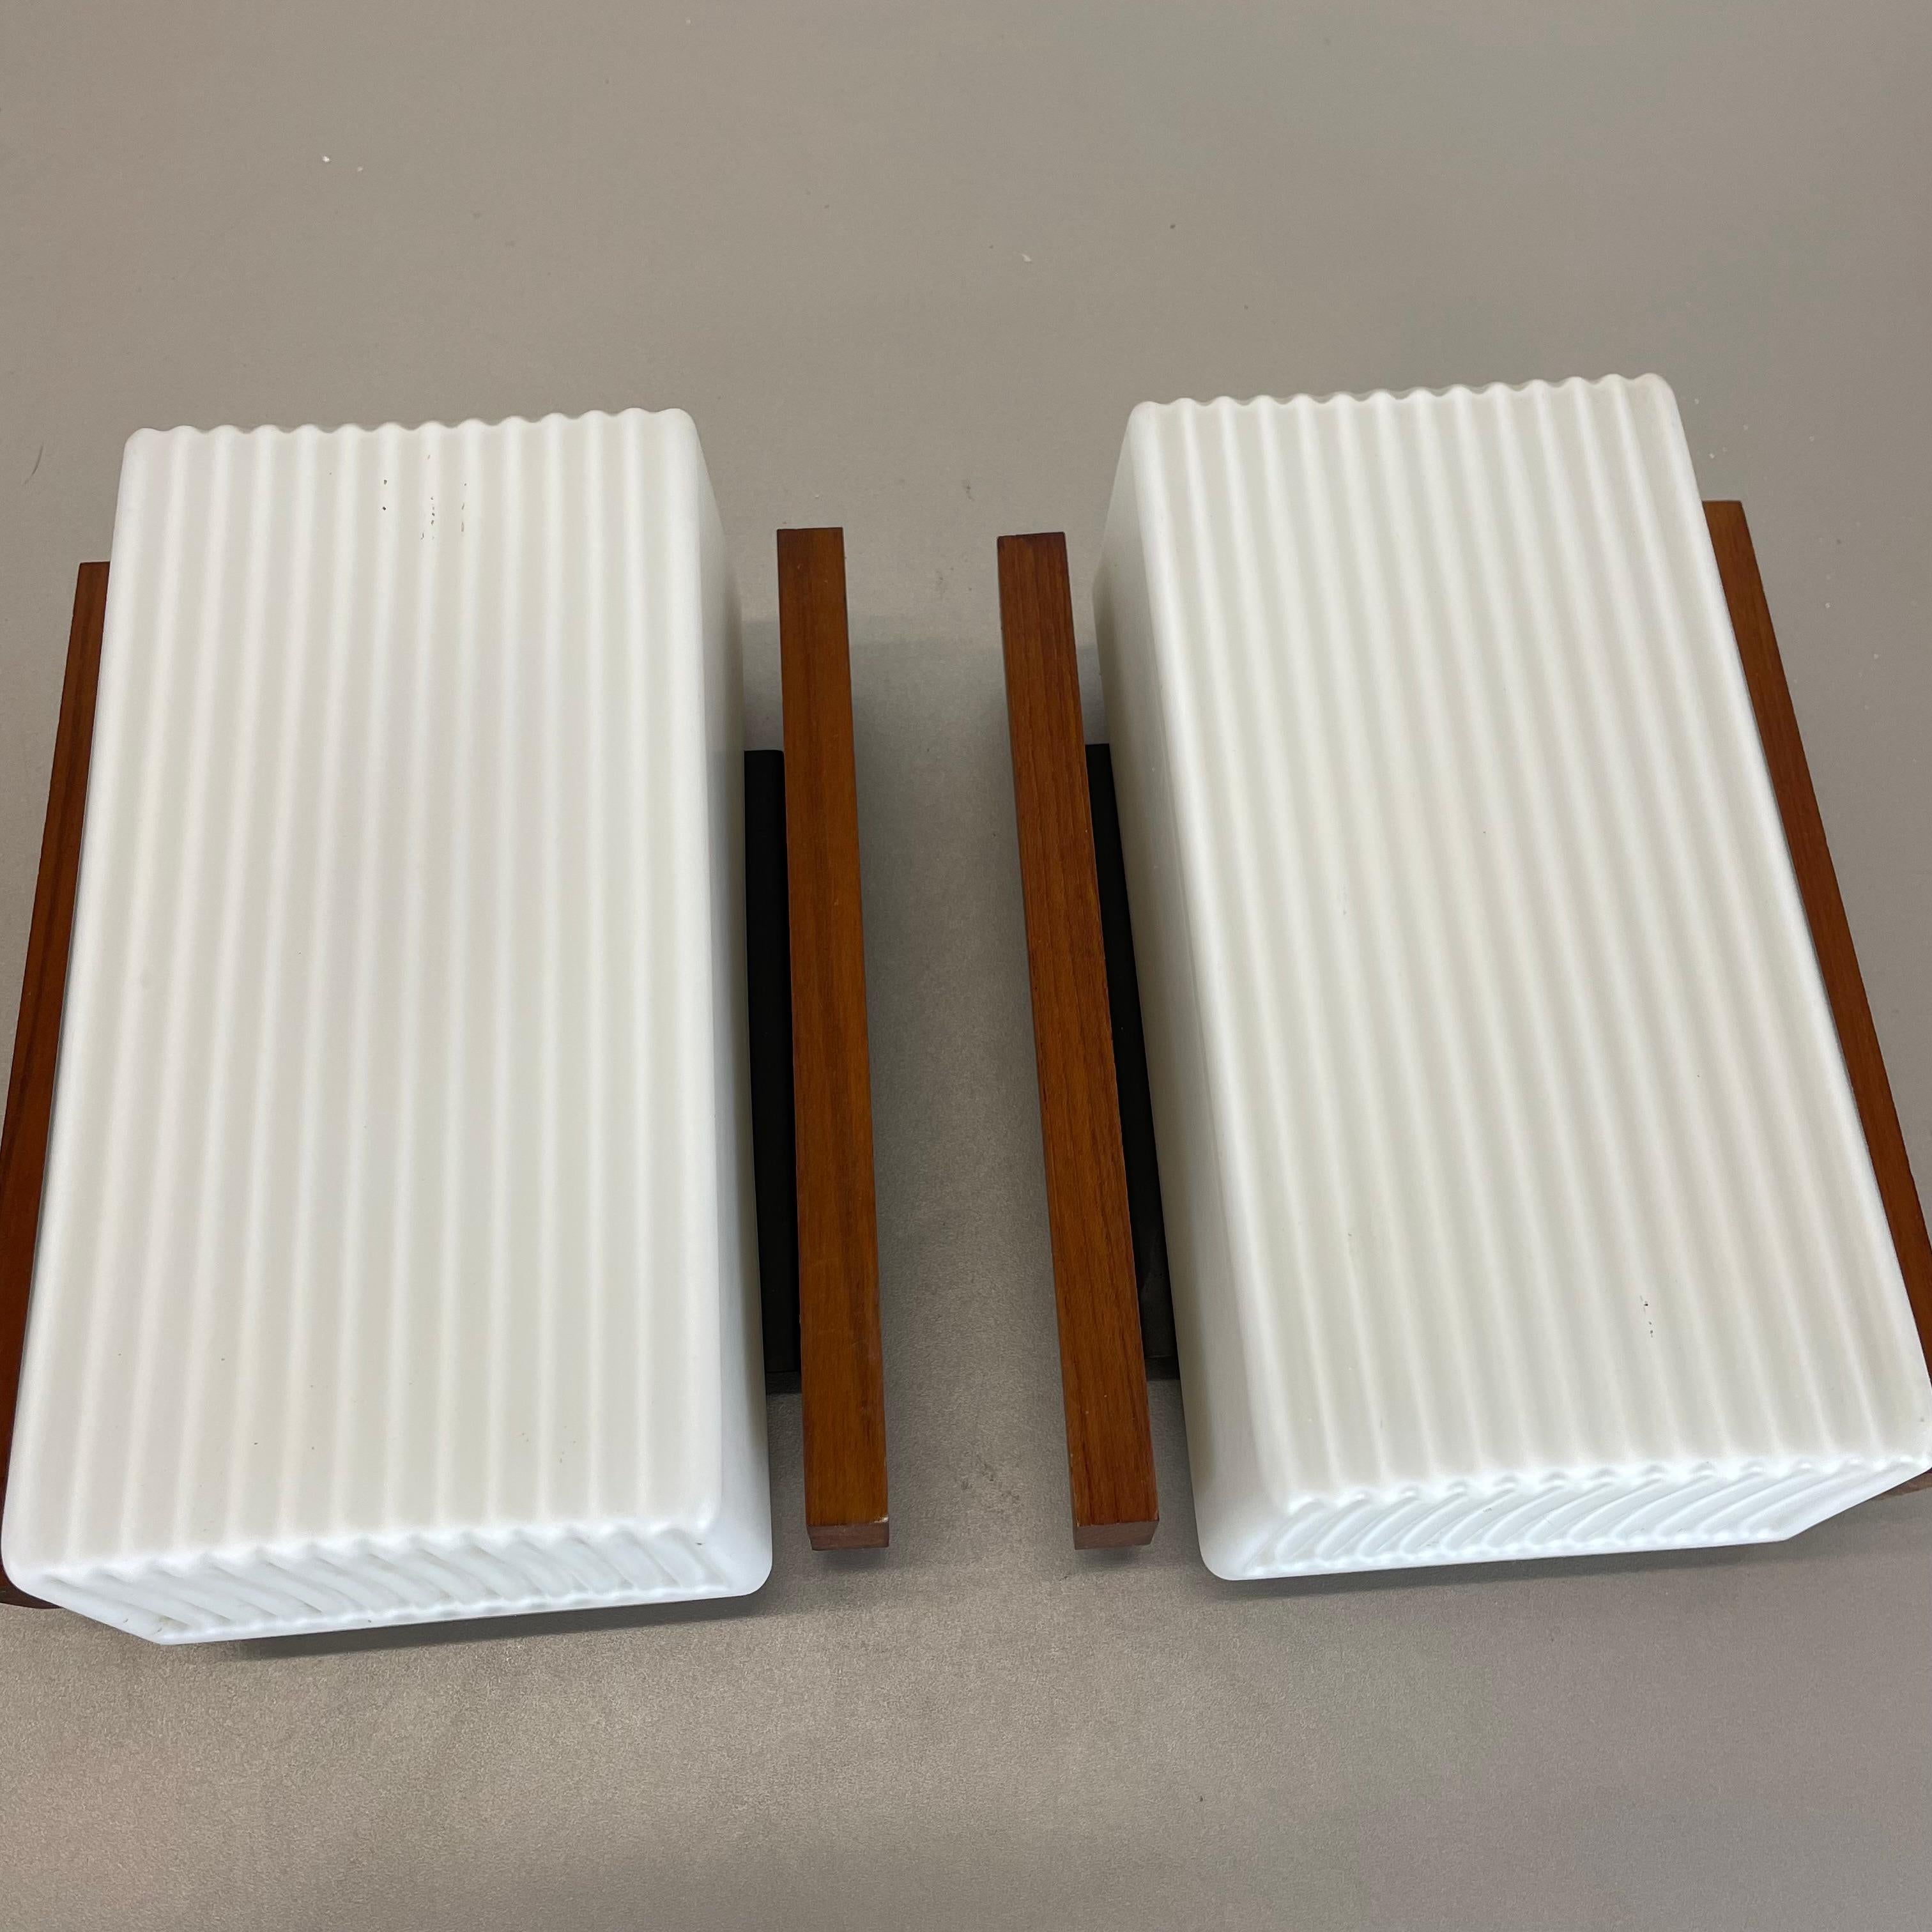 Set of 2 satin white glass and teak Wall Lights by BEGA Lights, Germany 1960s For Sale 2